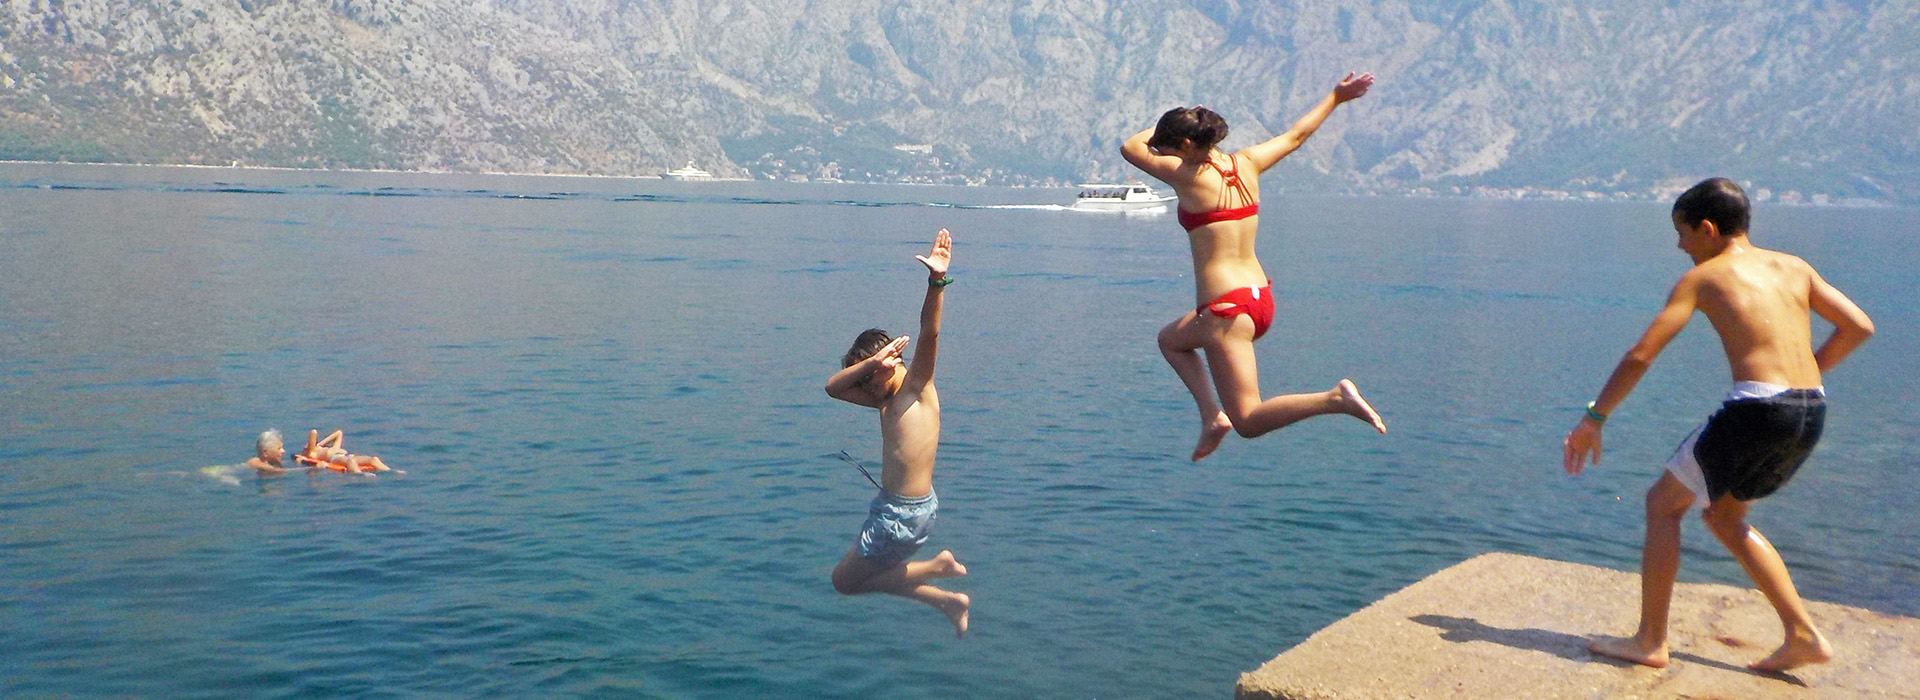 Luxury Family Holiday in Montenegro - Swimming time